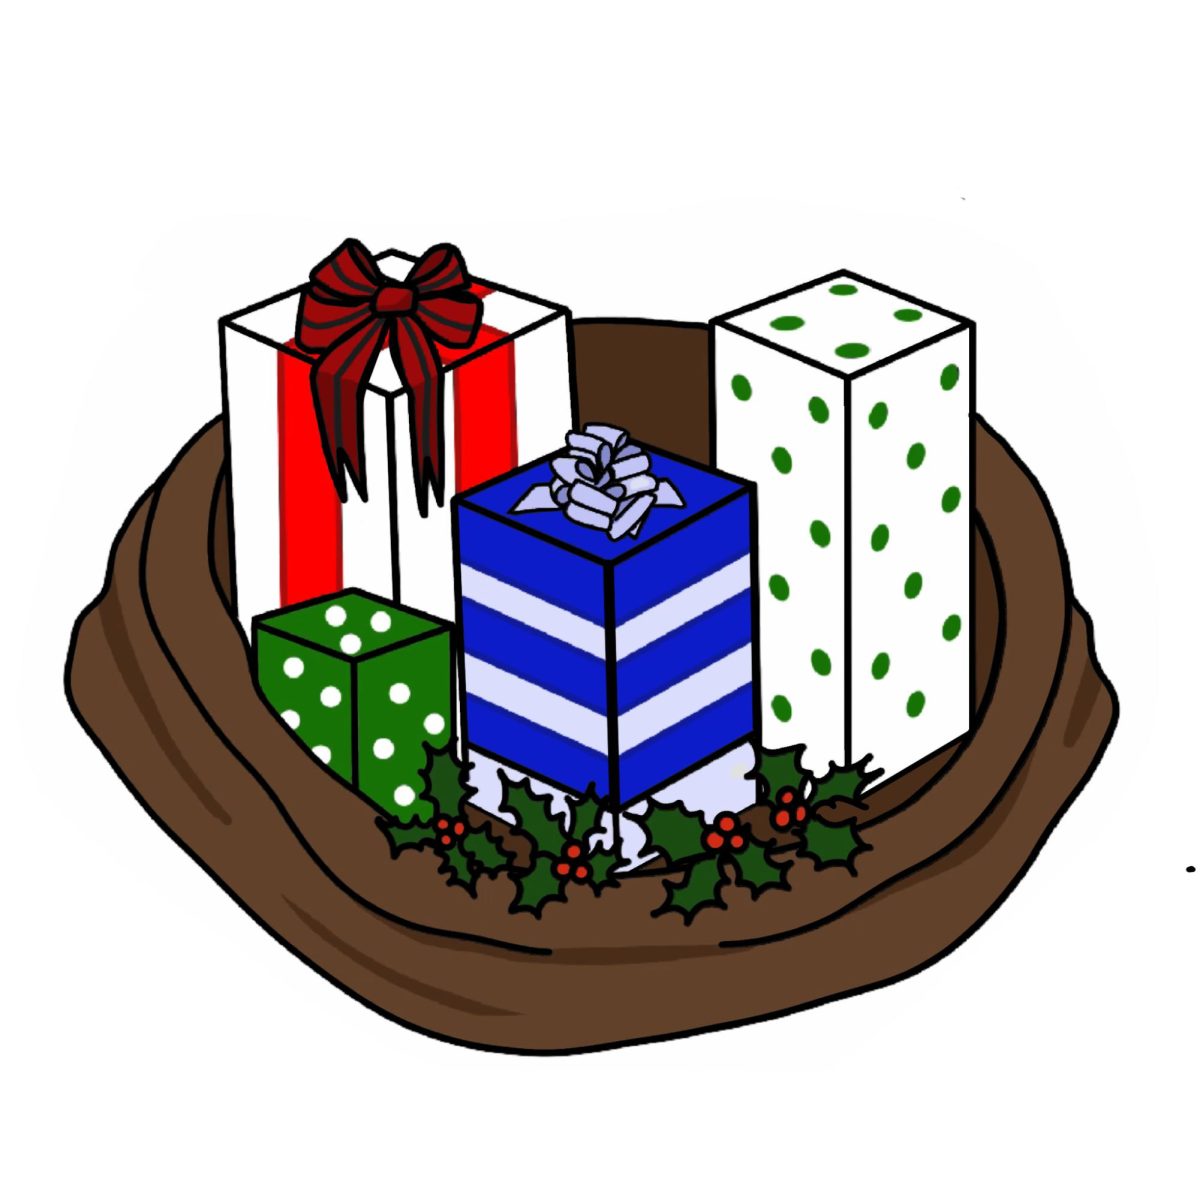 Counterpoint: The Joy of Getting Gifts vs. the Fulfillment of Giving